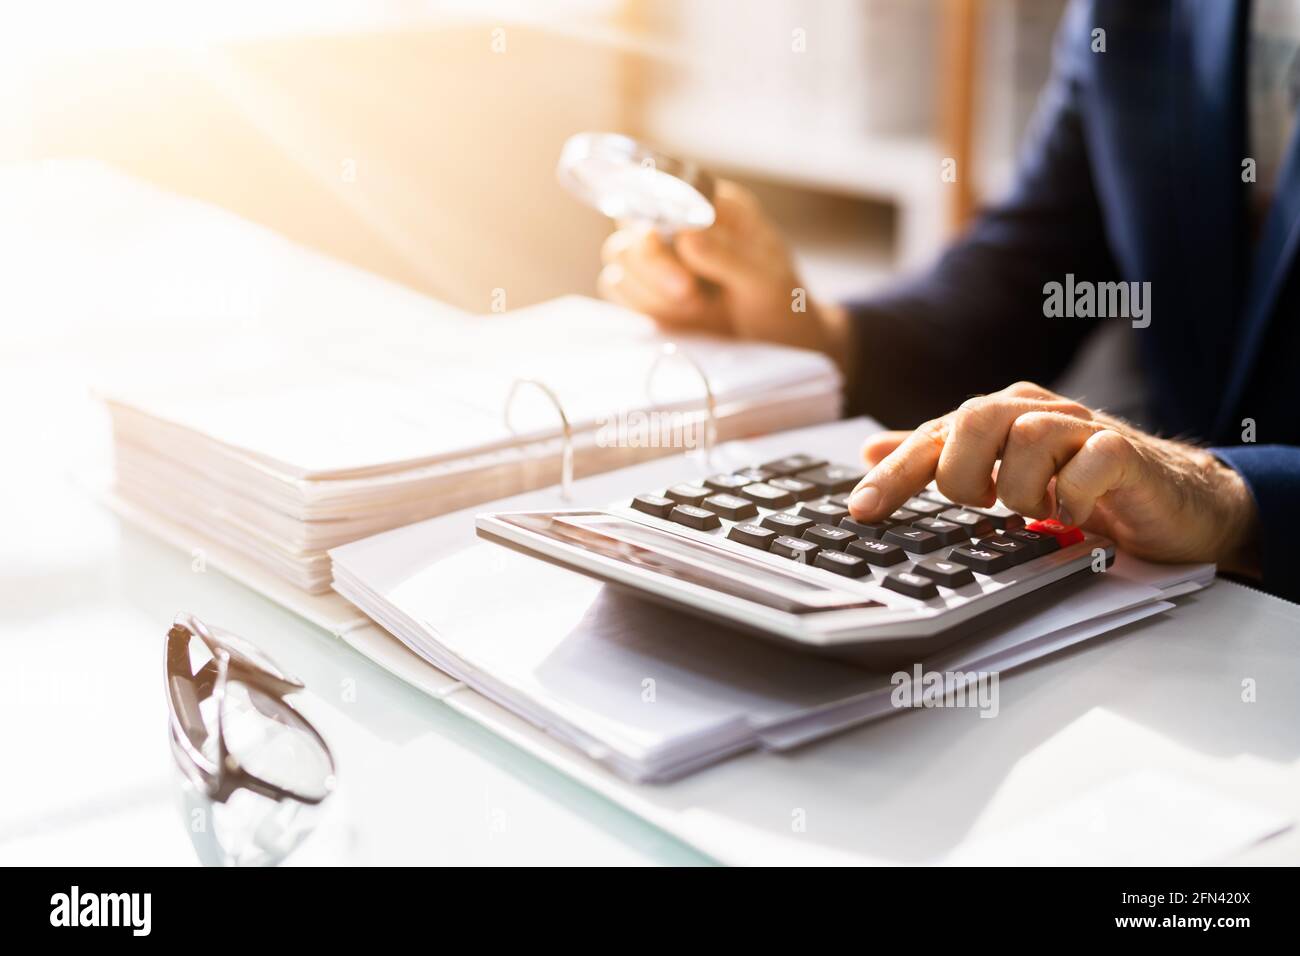 Corporate Auditor Using Magnifying Glass For Tax Fraud Audit Stock Photo